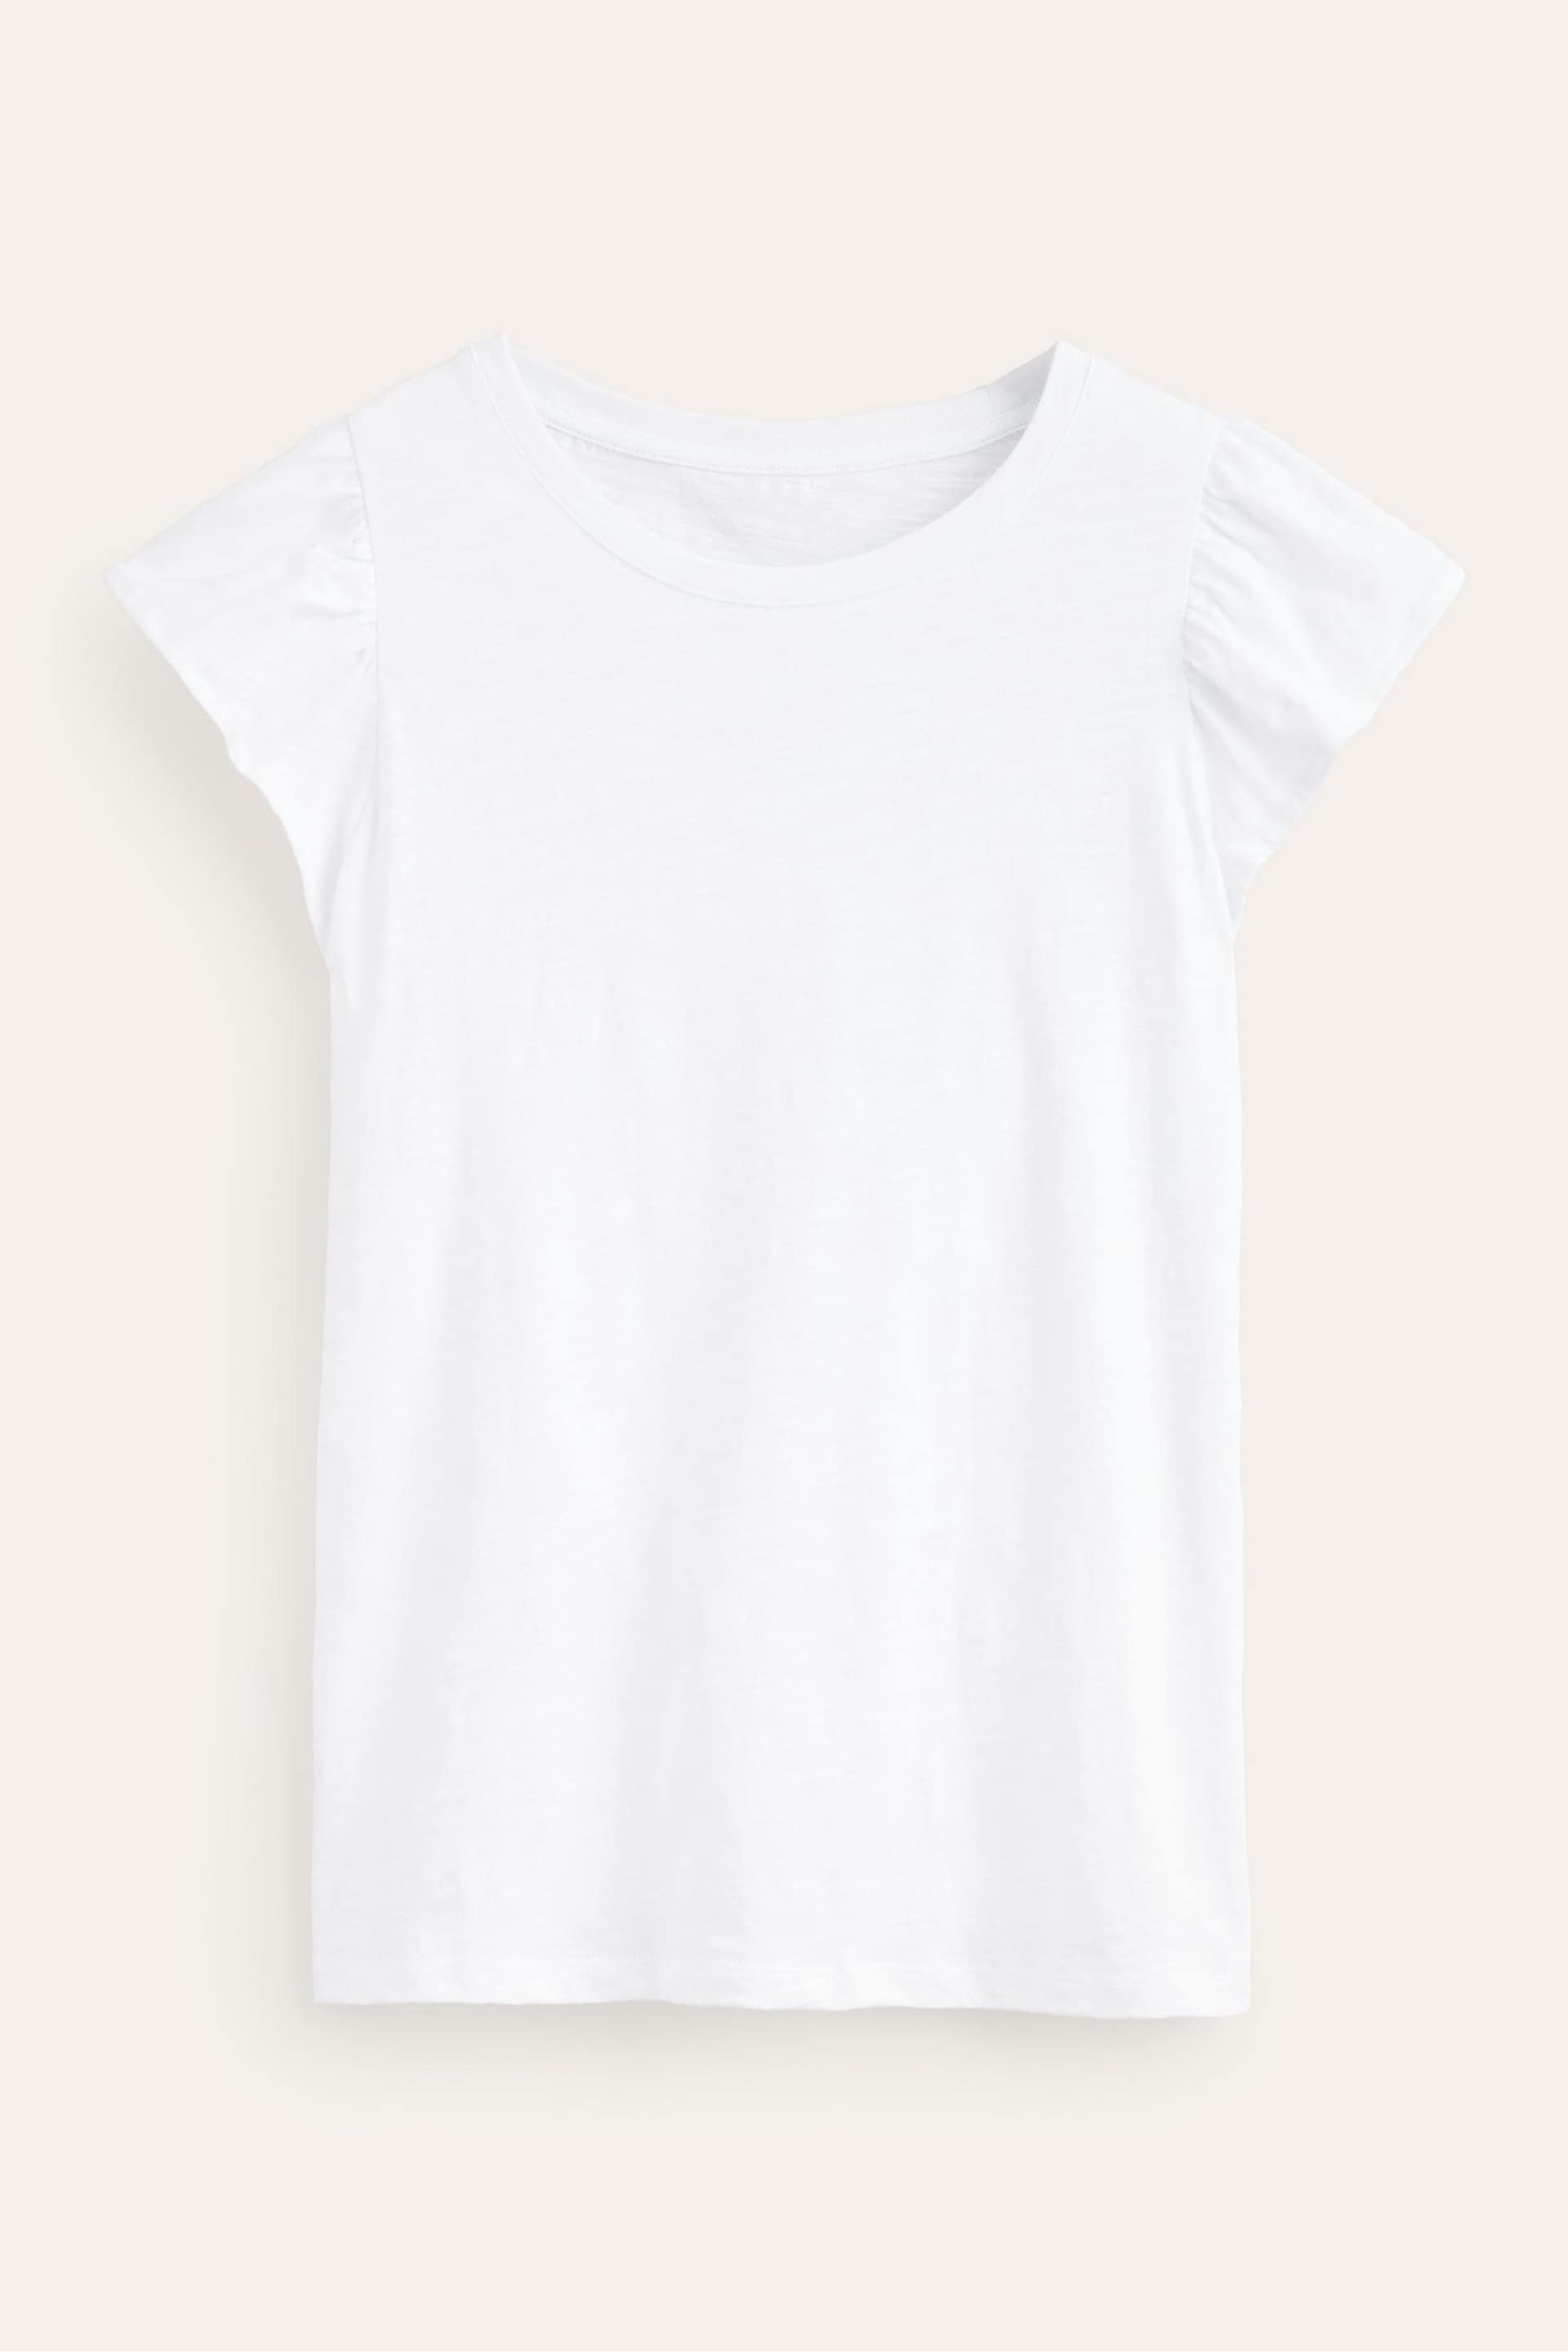 Boden White Cotton Flutter Top - Image 5 of 5